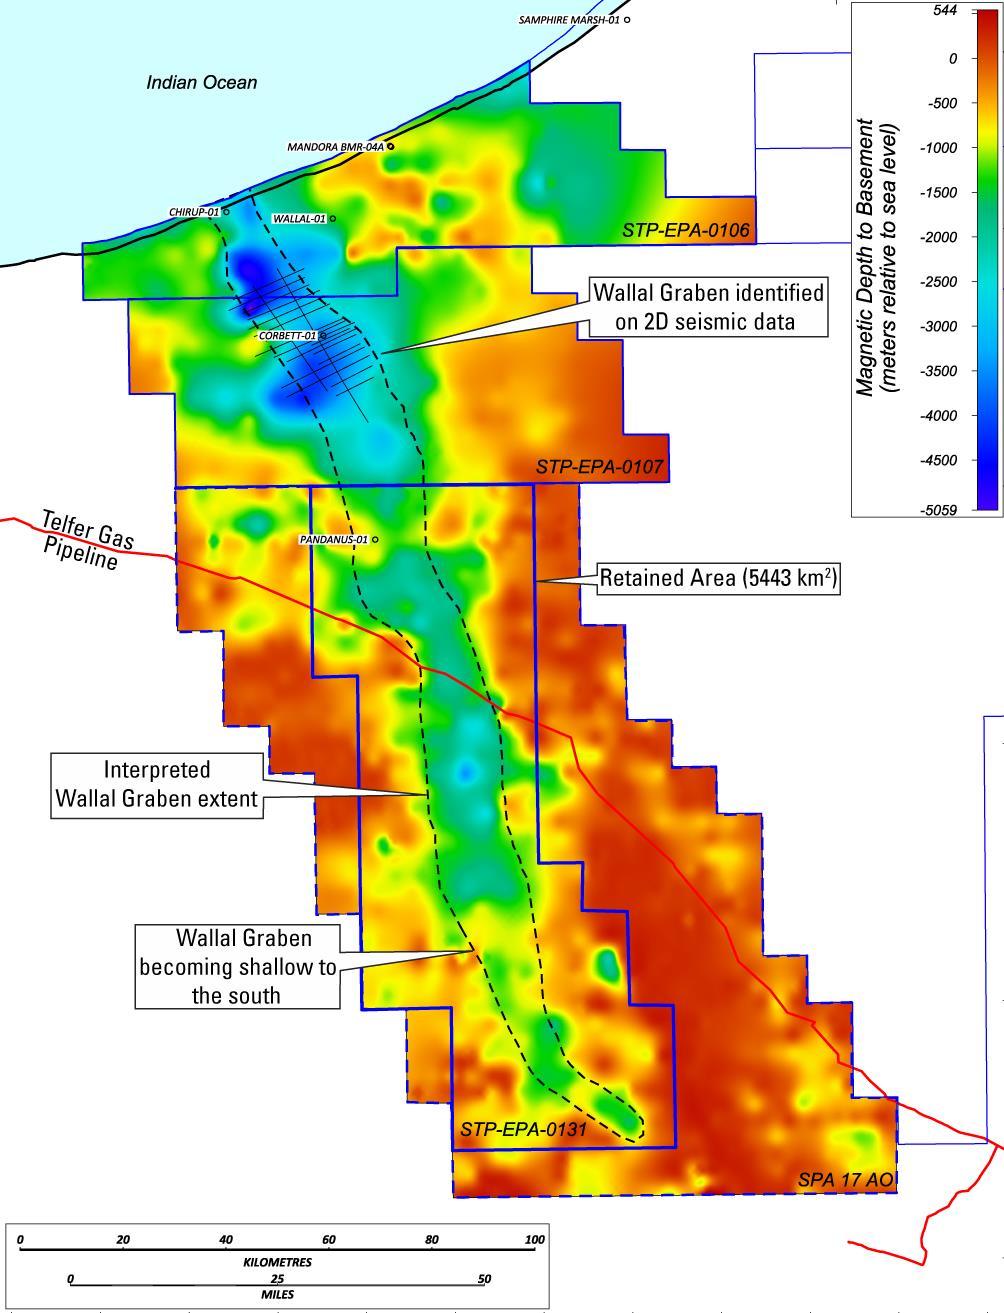 NEW GRAVITY SURVEY CONFIRMS THE STORY Conducive to efficient exploration ~15km wide ~200km long within Oilex areas Prospectivity Conventional and unconventional Leads and prospects portfolio being